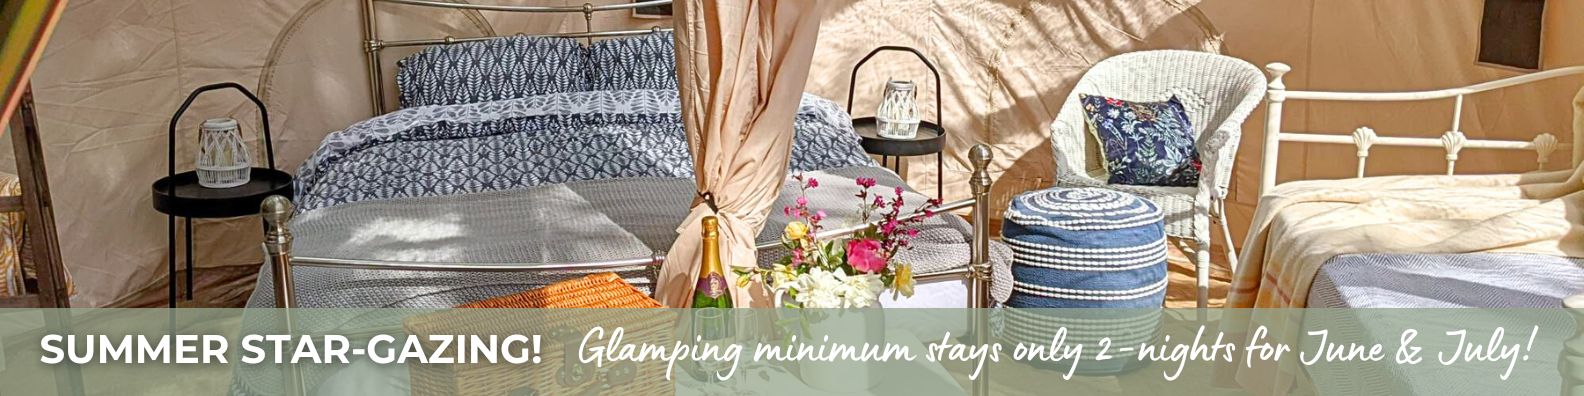 Wytch Wood Camping and Glamping | Somerset | Glamping minimum stays only 2 nights for June & July!